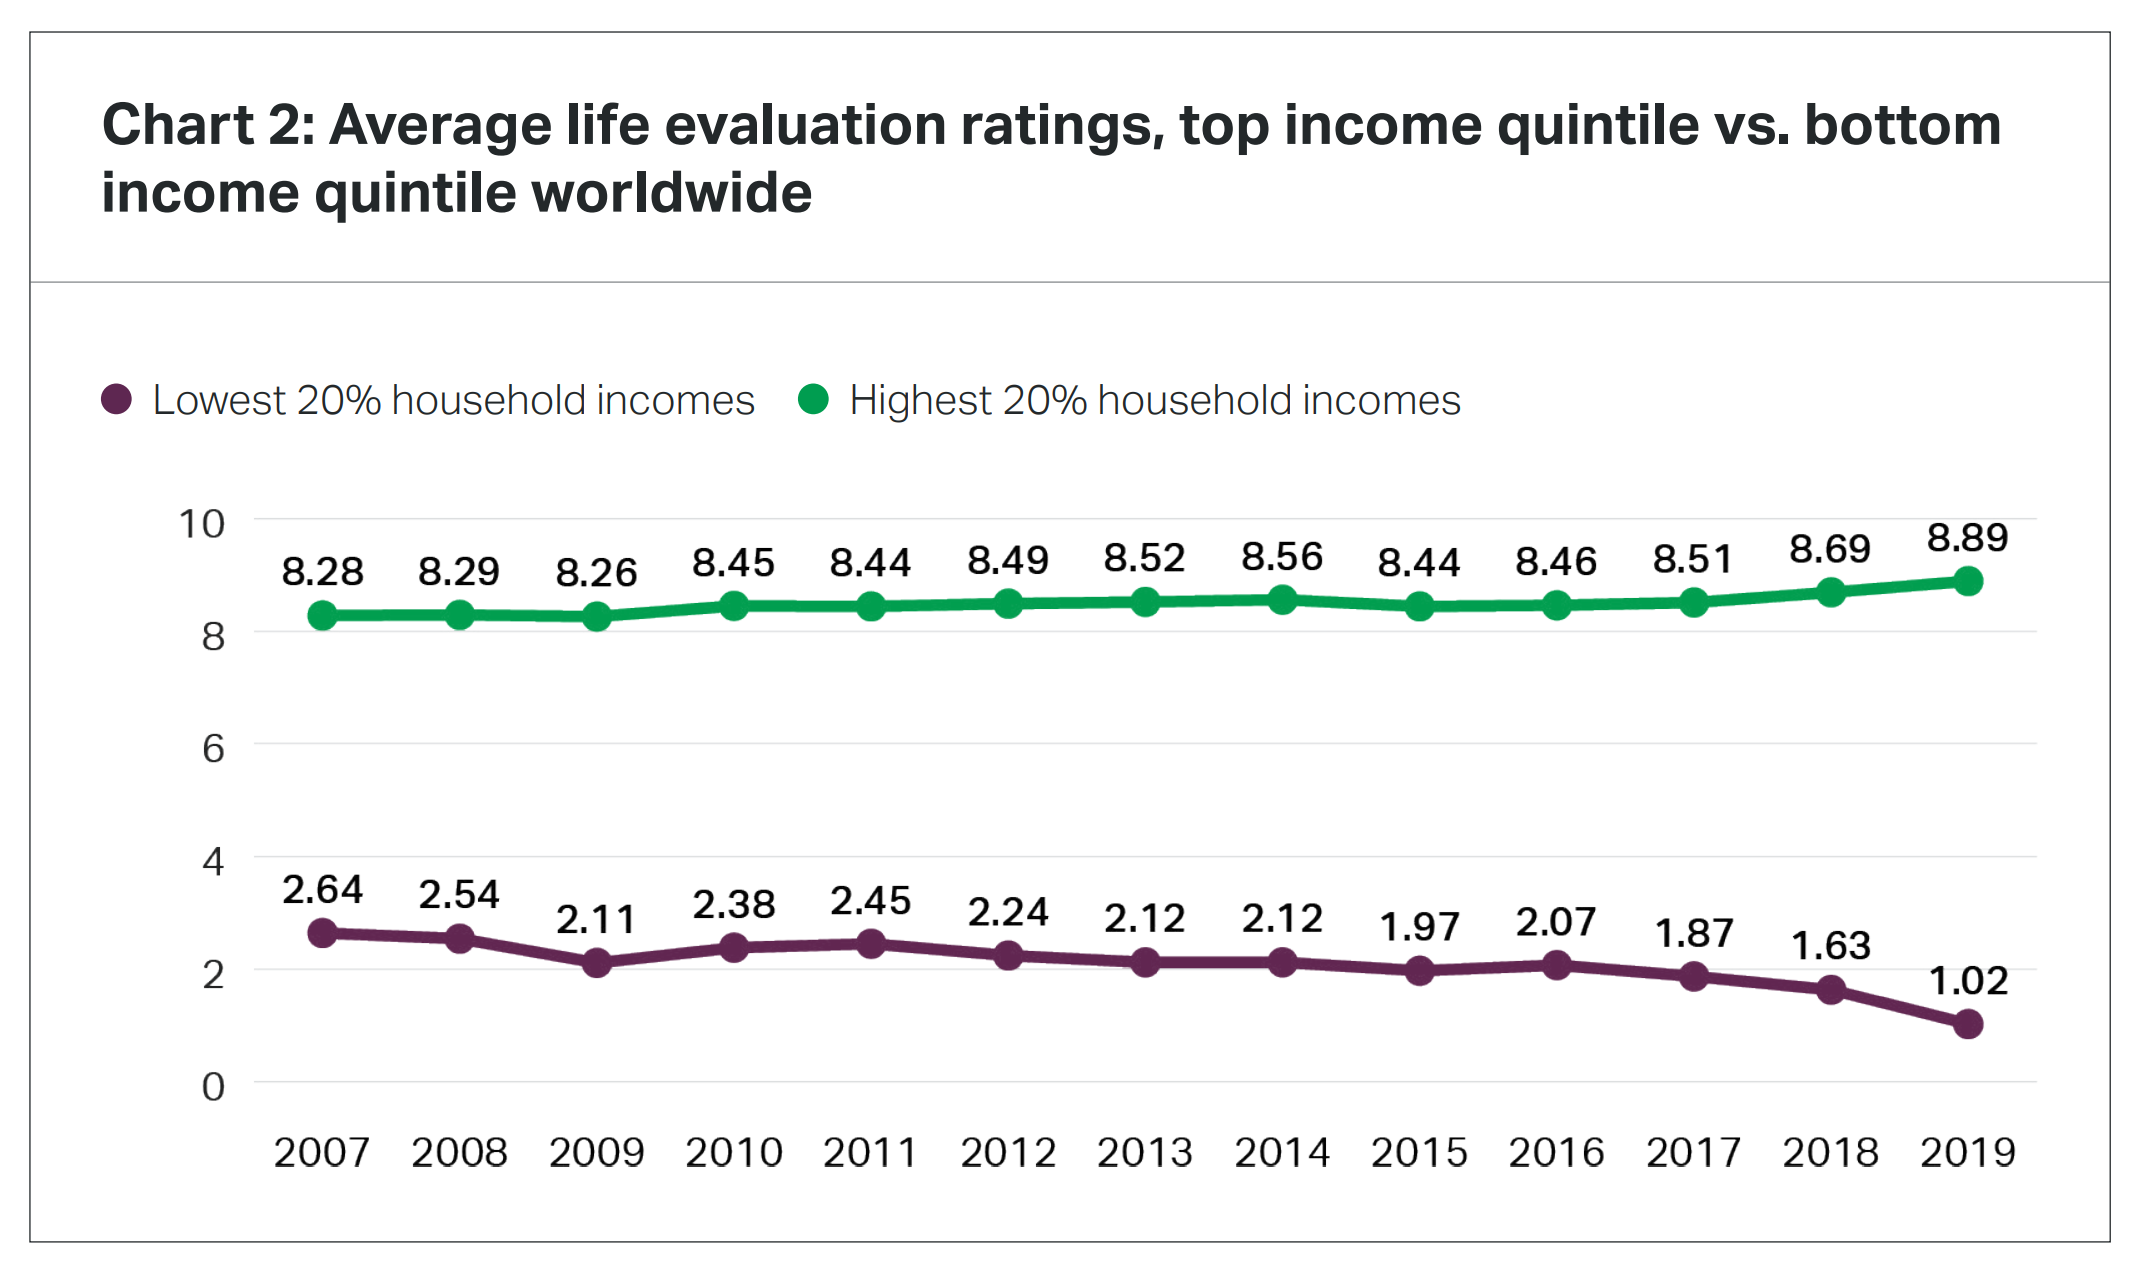 Average life evaluation ratings, top income quintile vs. bottom income quintile worldwide, 2007-2019. Graphic: Gallup